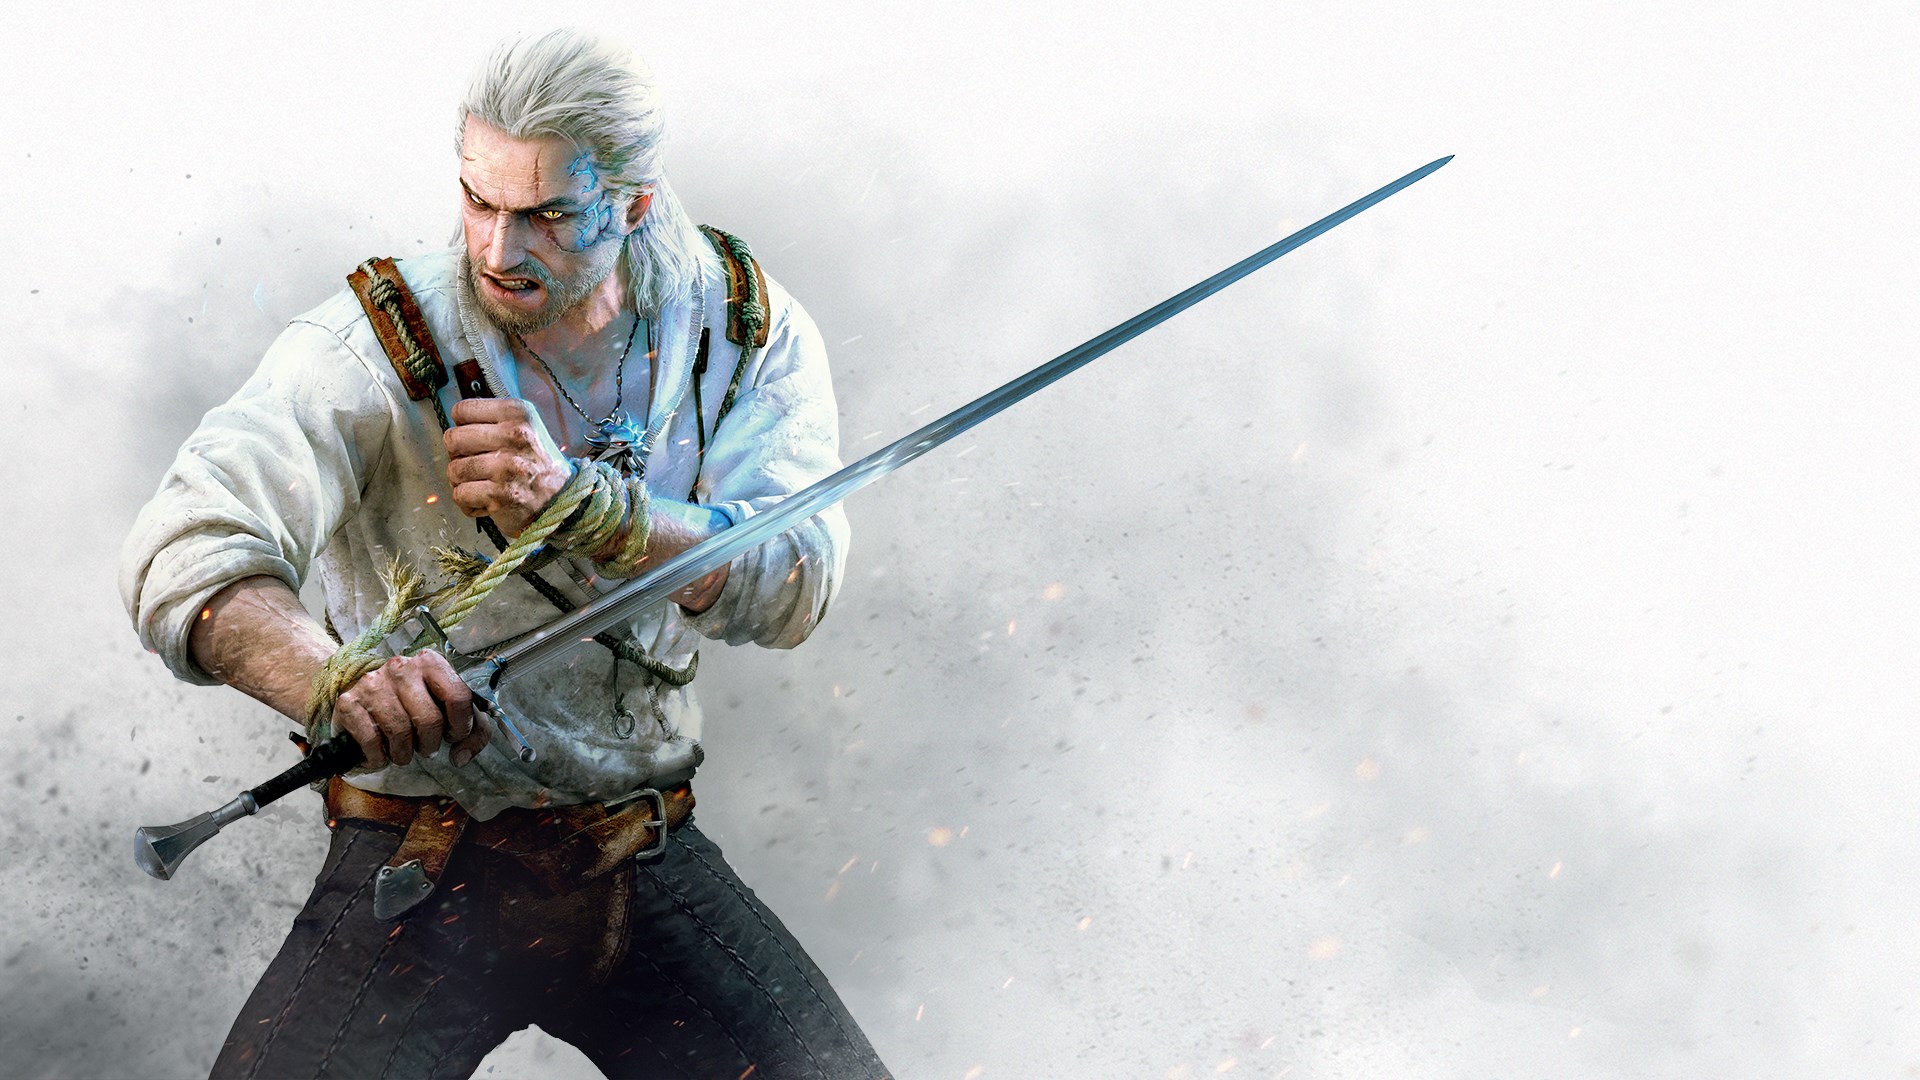 Buy The Witcher 3 Hearts Of Stone Microsoft Store